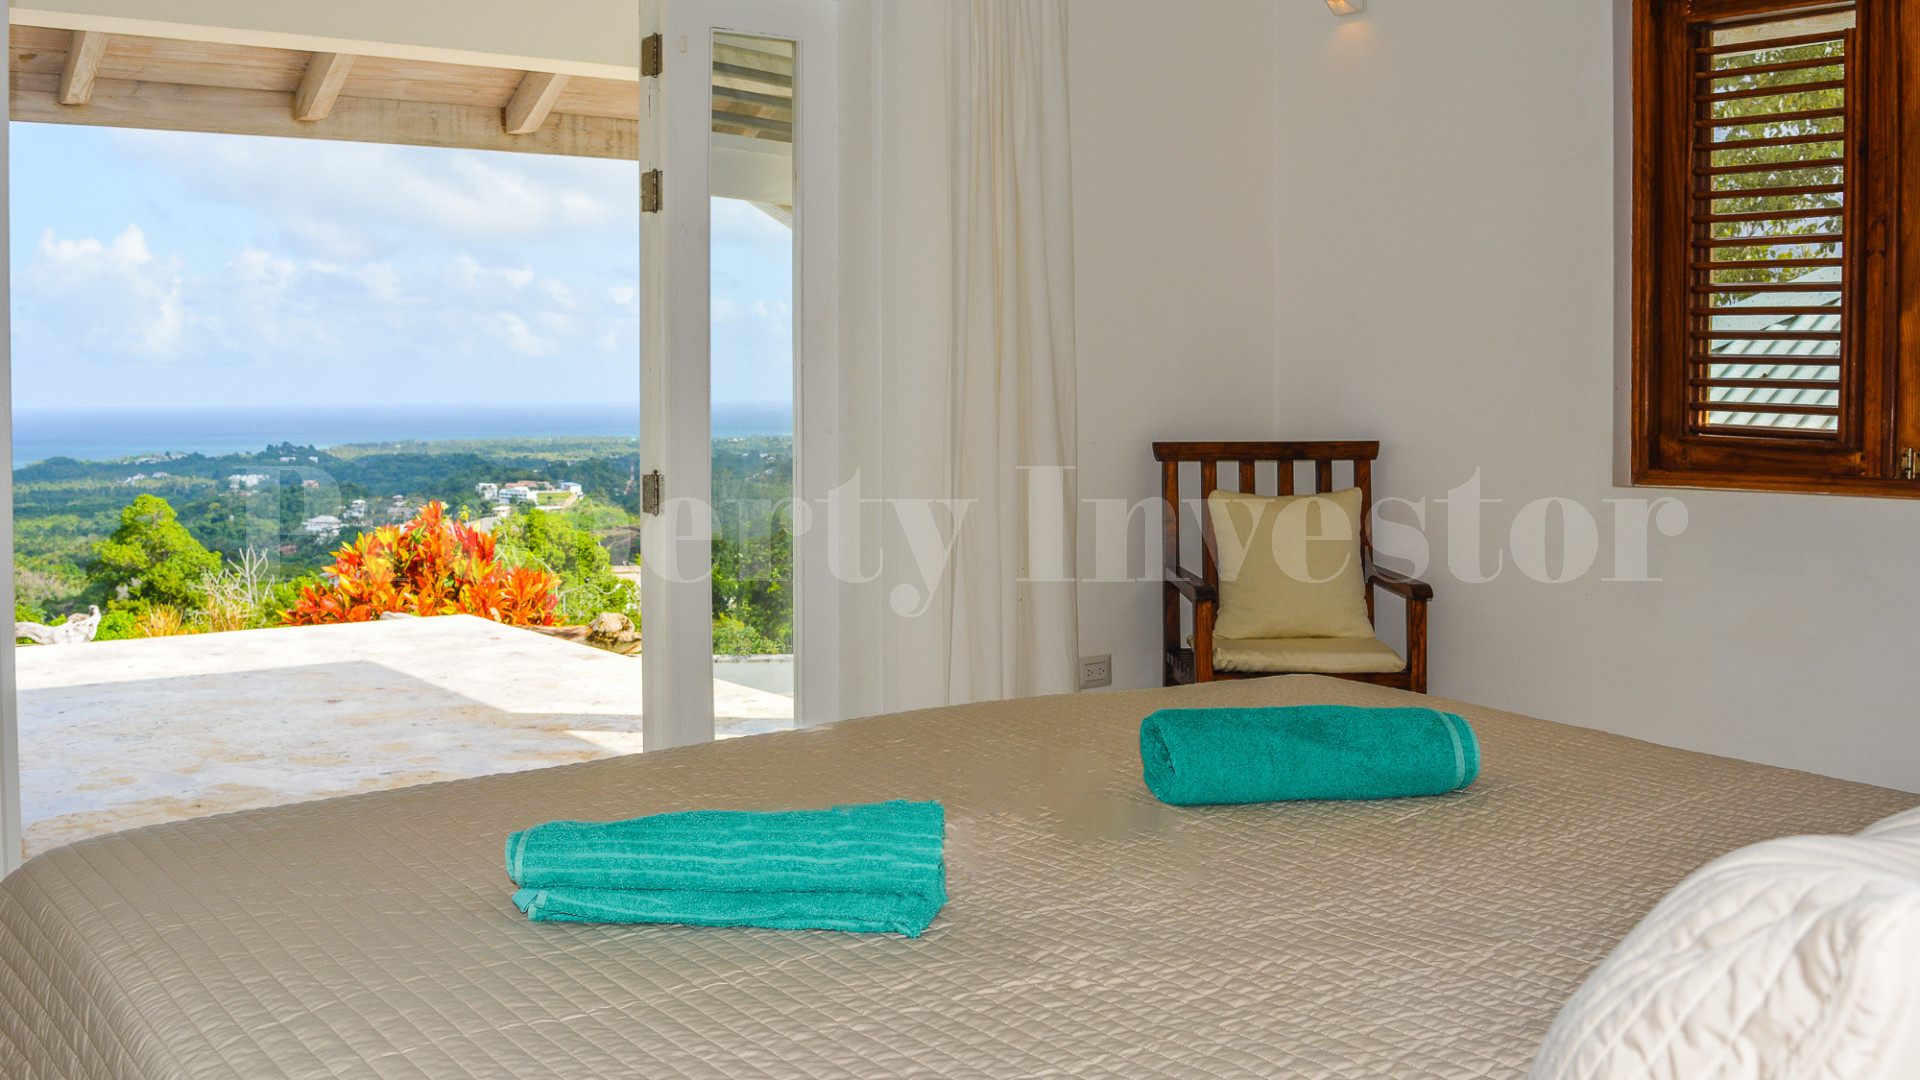 One-of-a-Kind 7 Bedroom Luxury Mountain Villa with Amazing Panoramic Sea Views and Massive Lot Near Las Terrenas